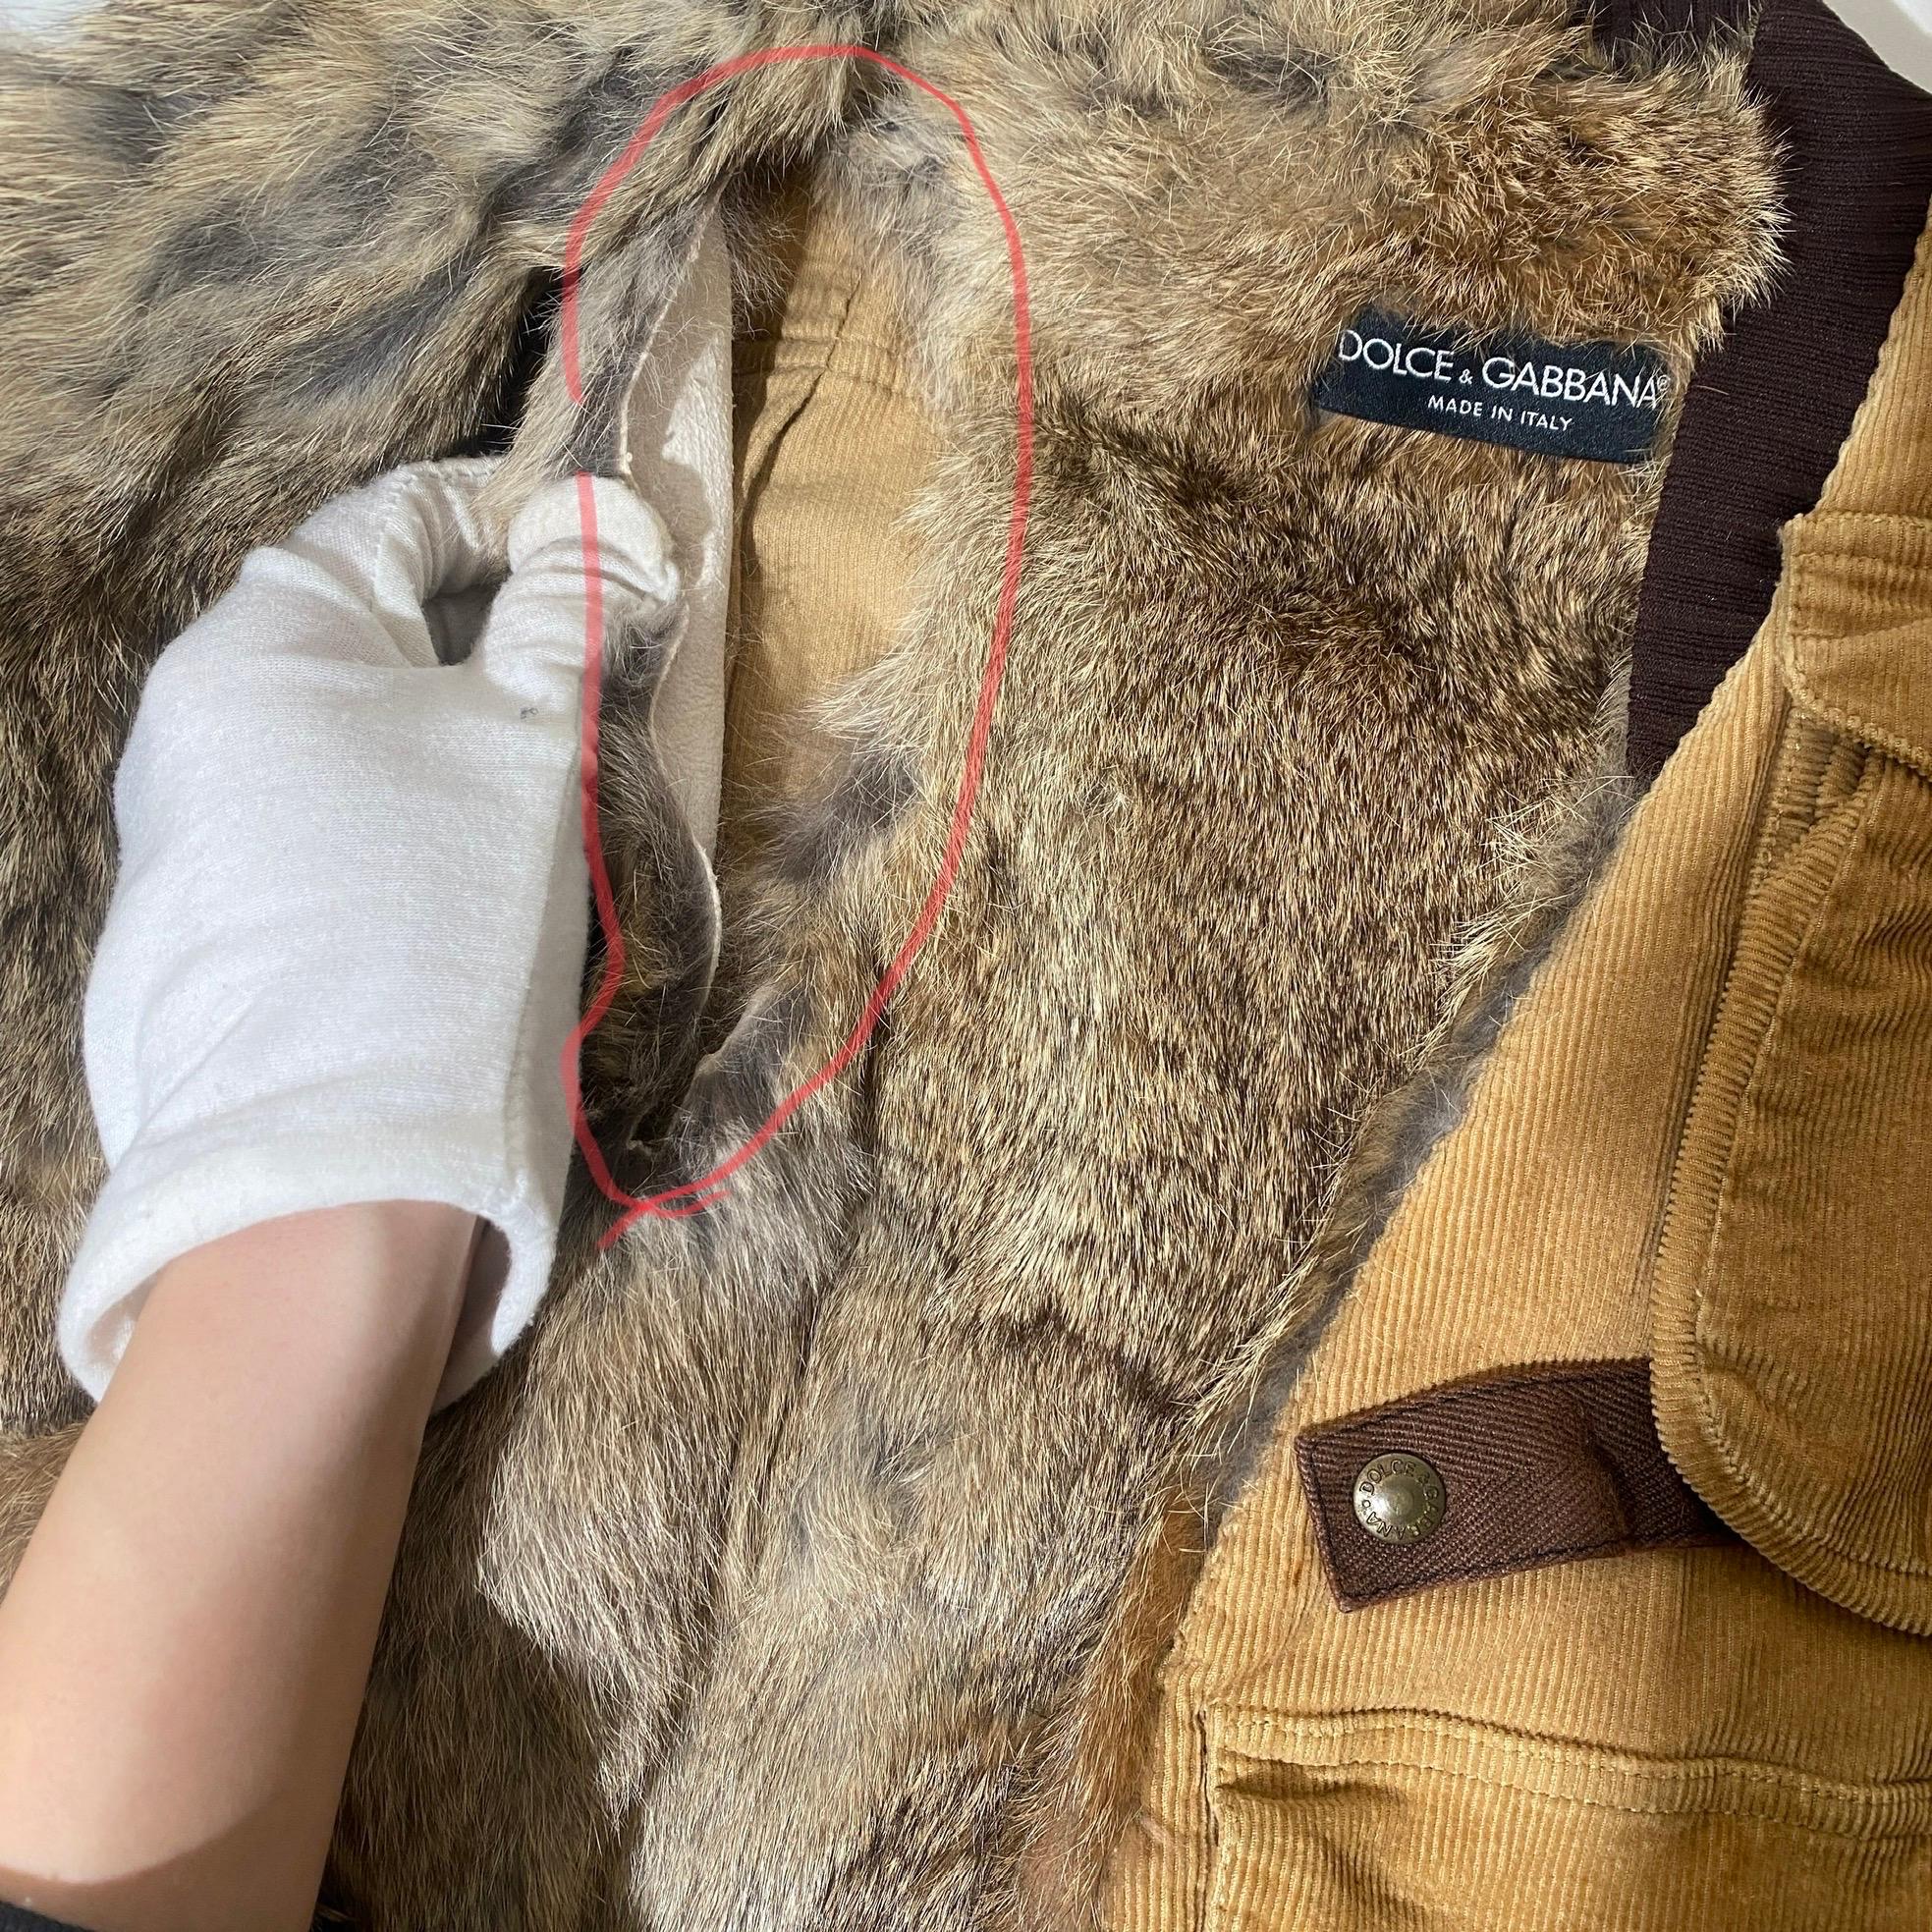 Dolce & Gabbana 2002 AW Tan Corduroy Cargo Fur Vest In Good Condition For Sale In Los Angeles, CA